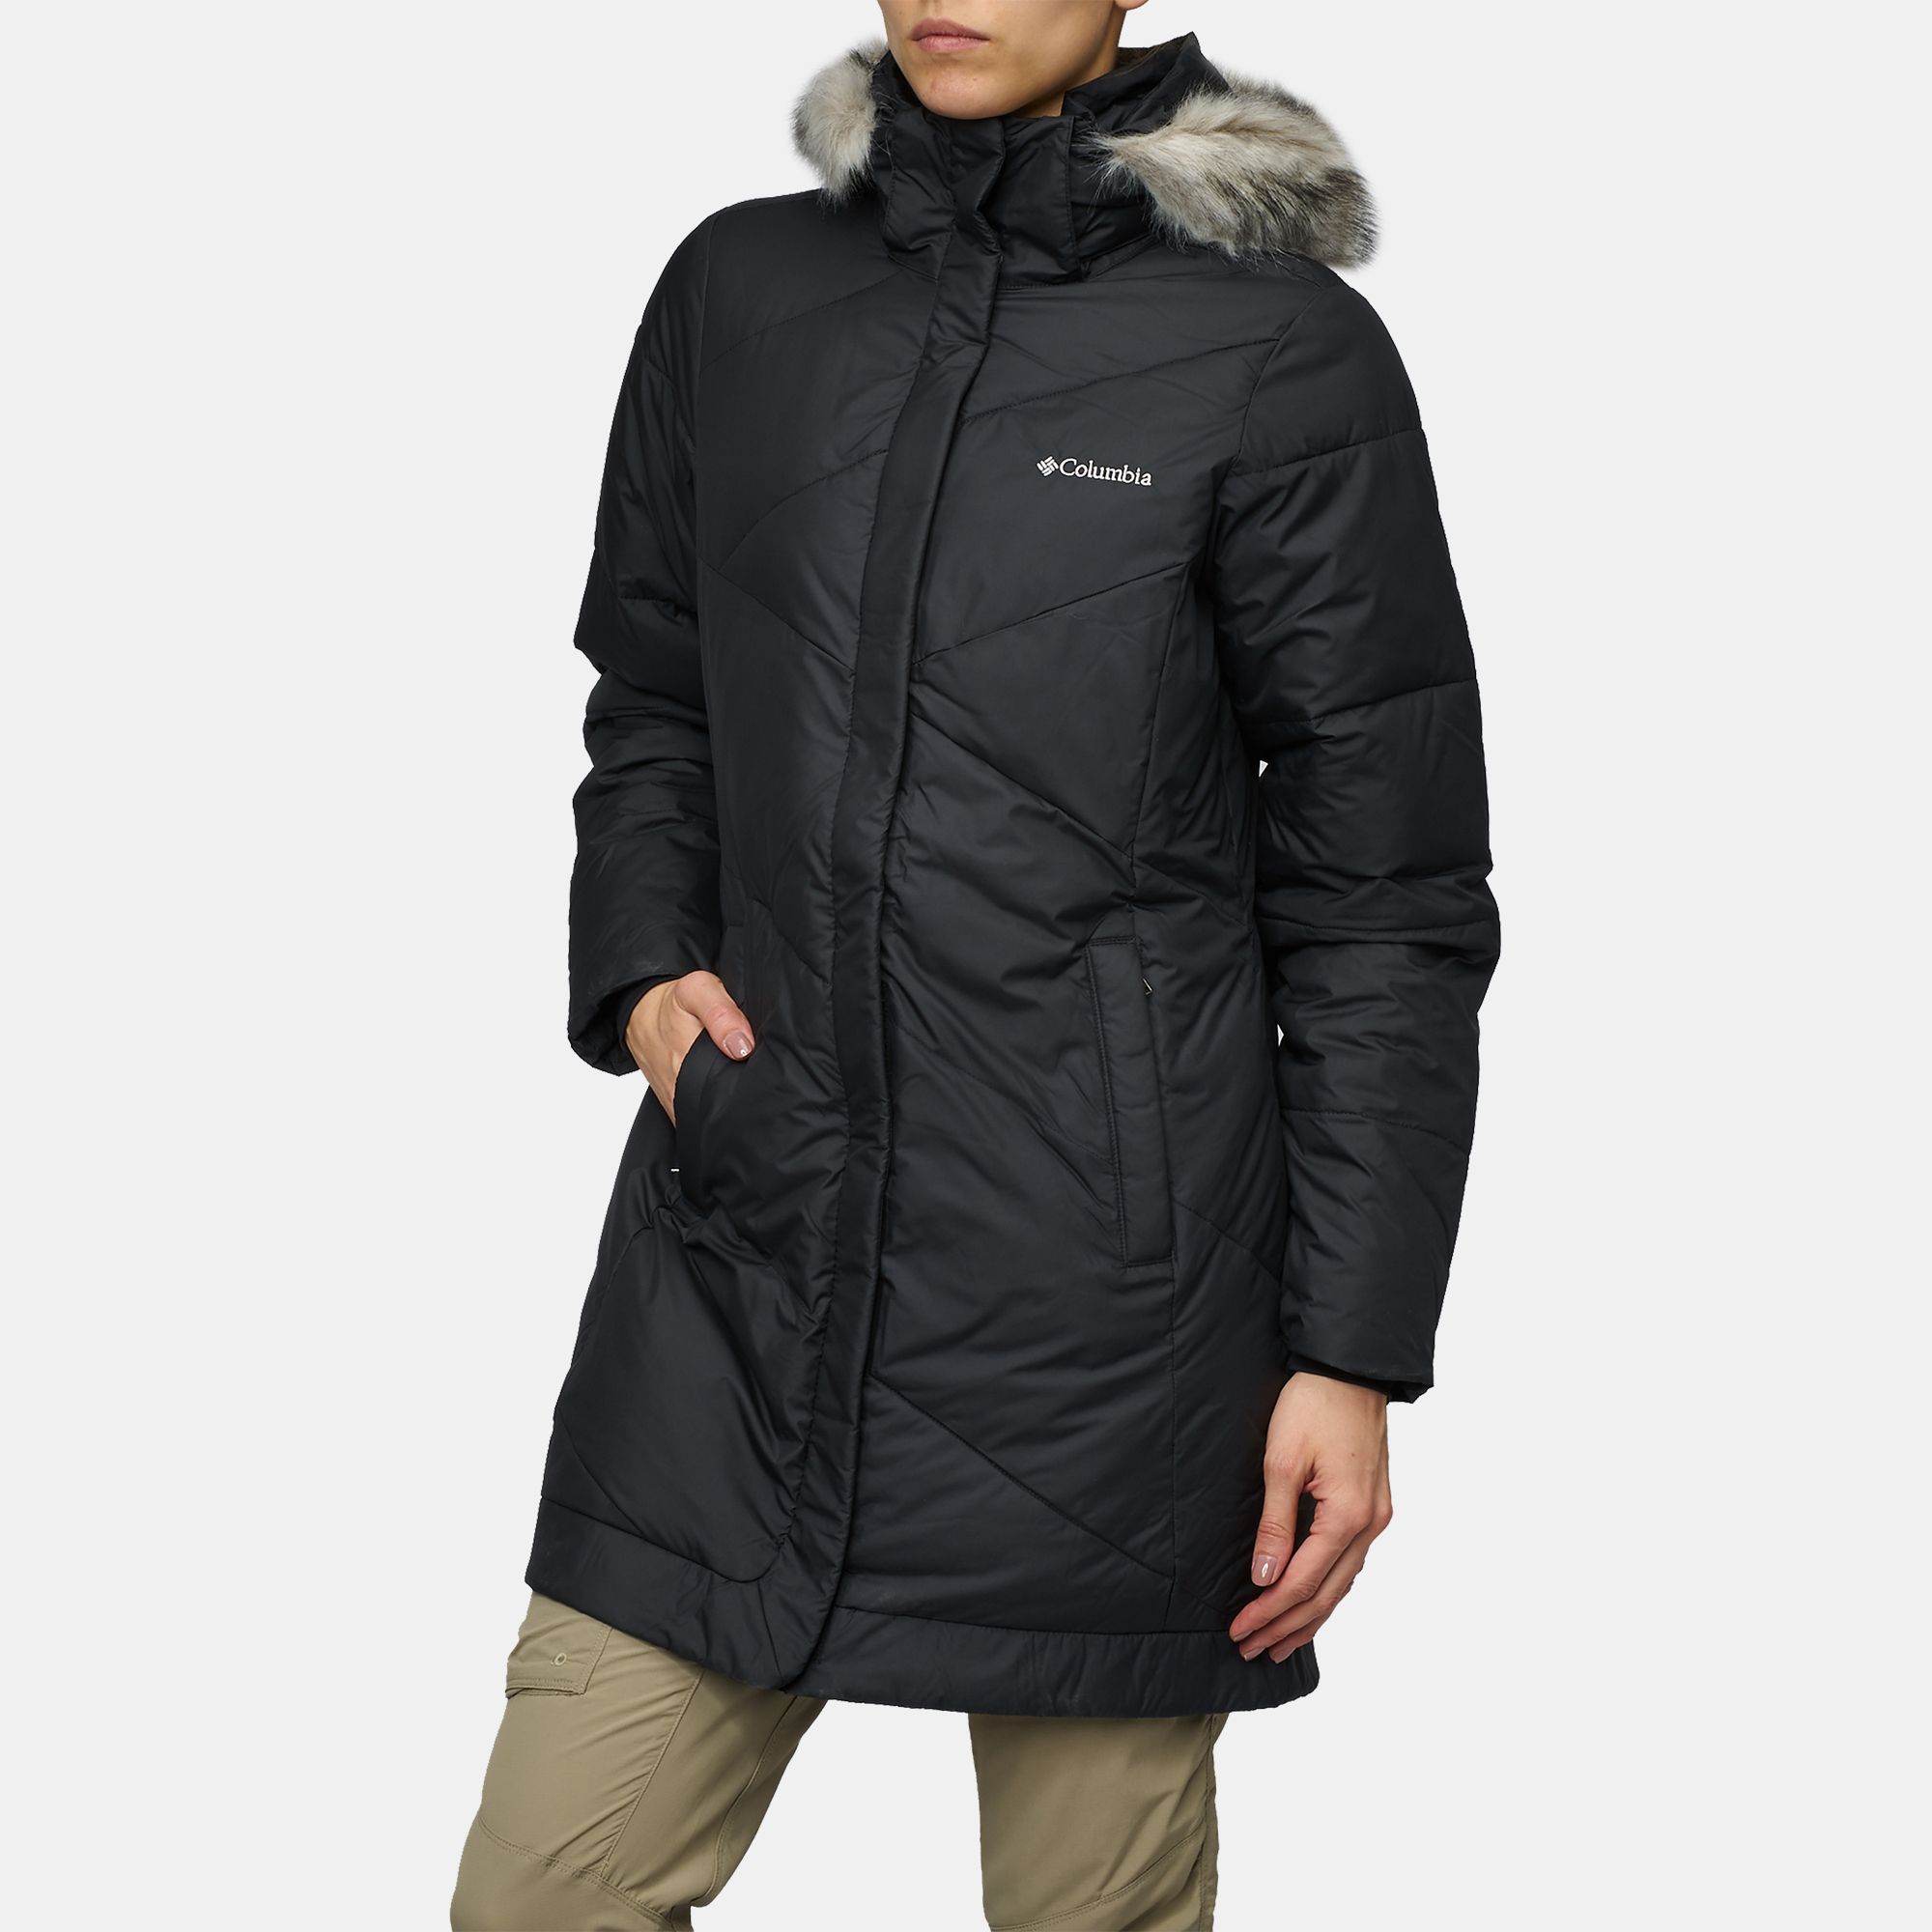 Shop Black Columbia Snow Eclipse™ Mid Jacket for Womens by Columbia | SSS